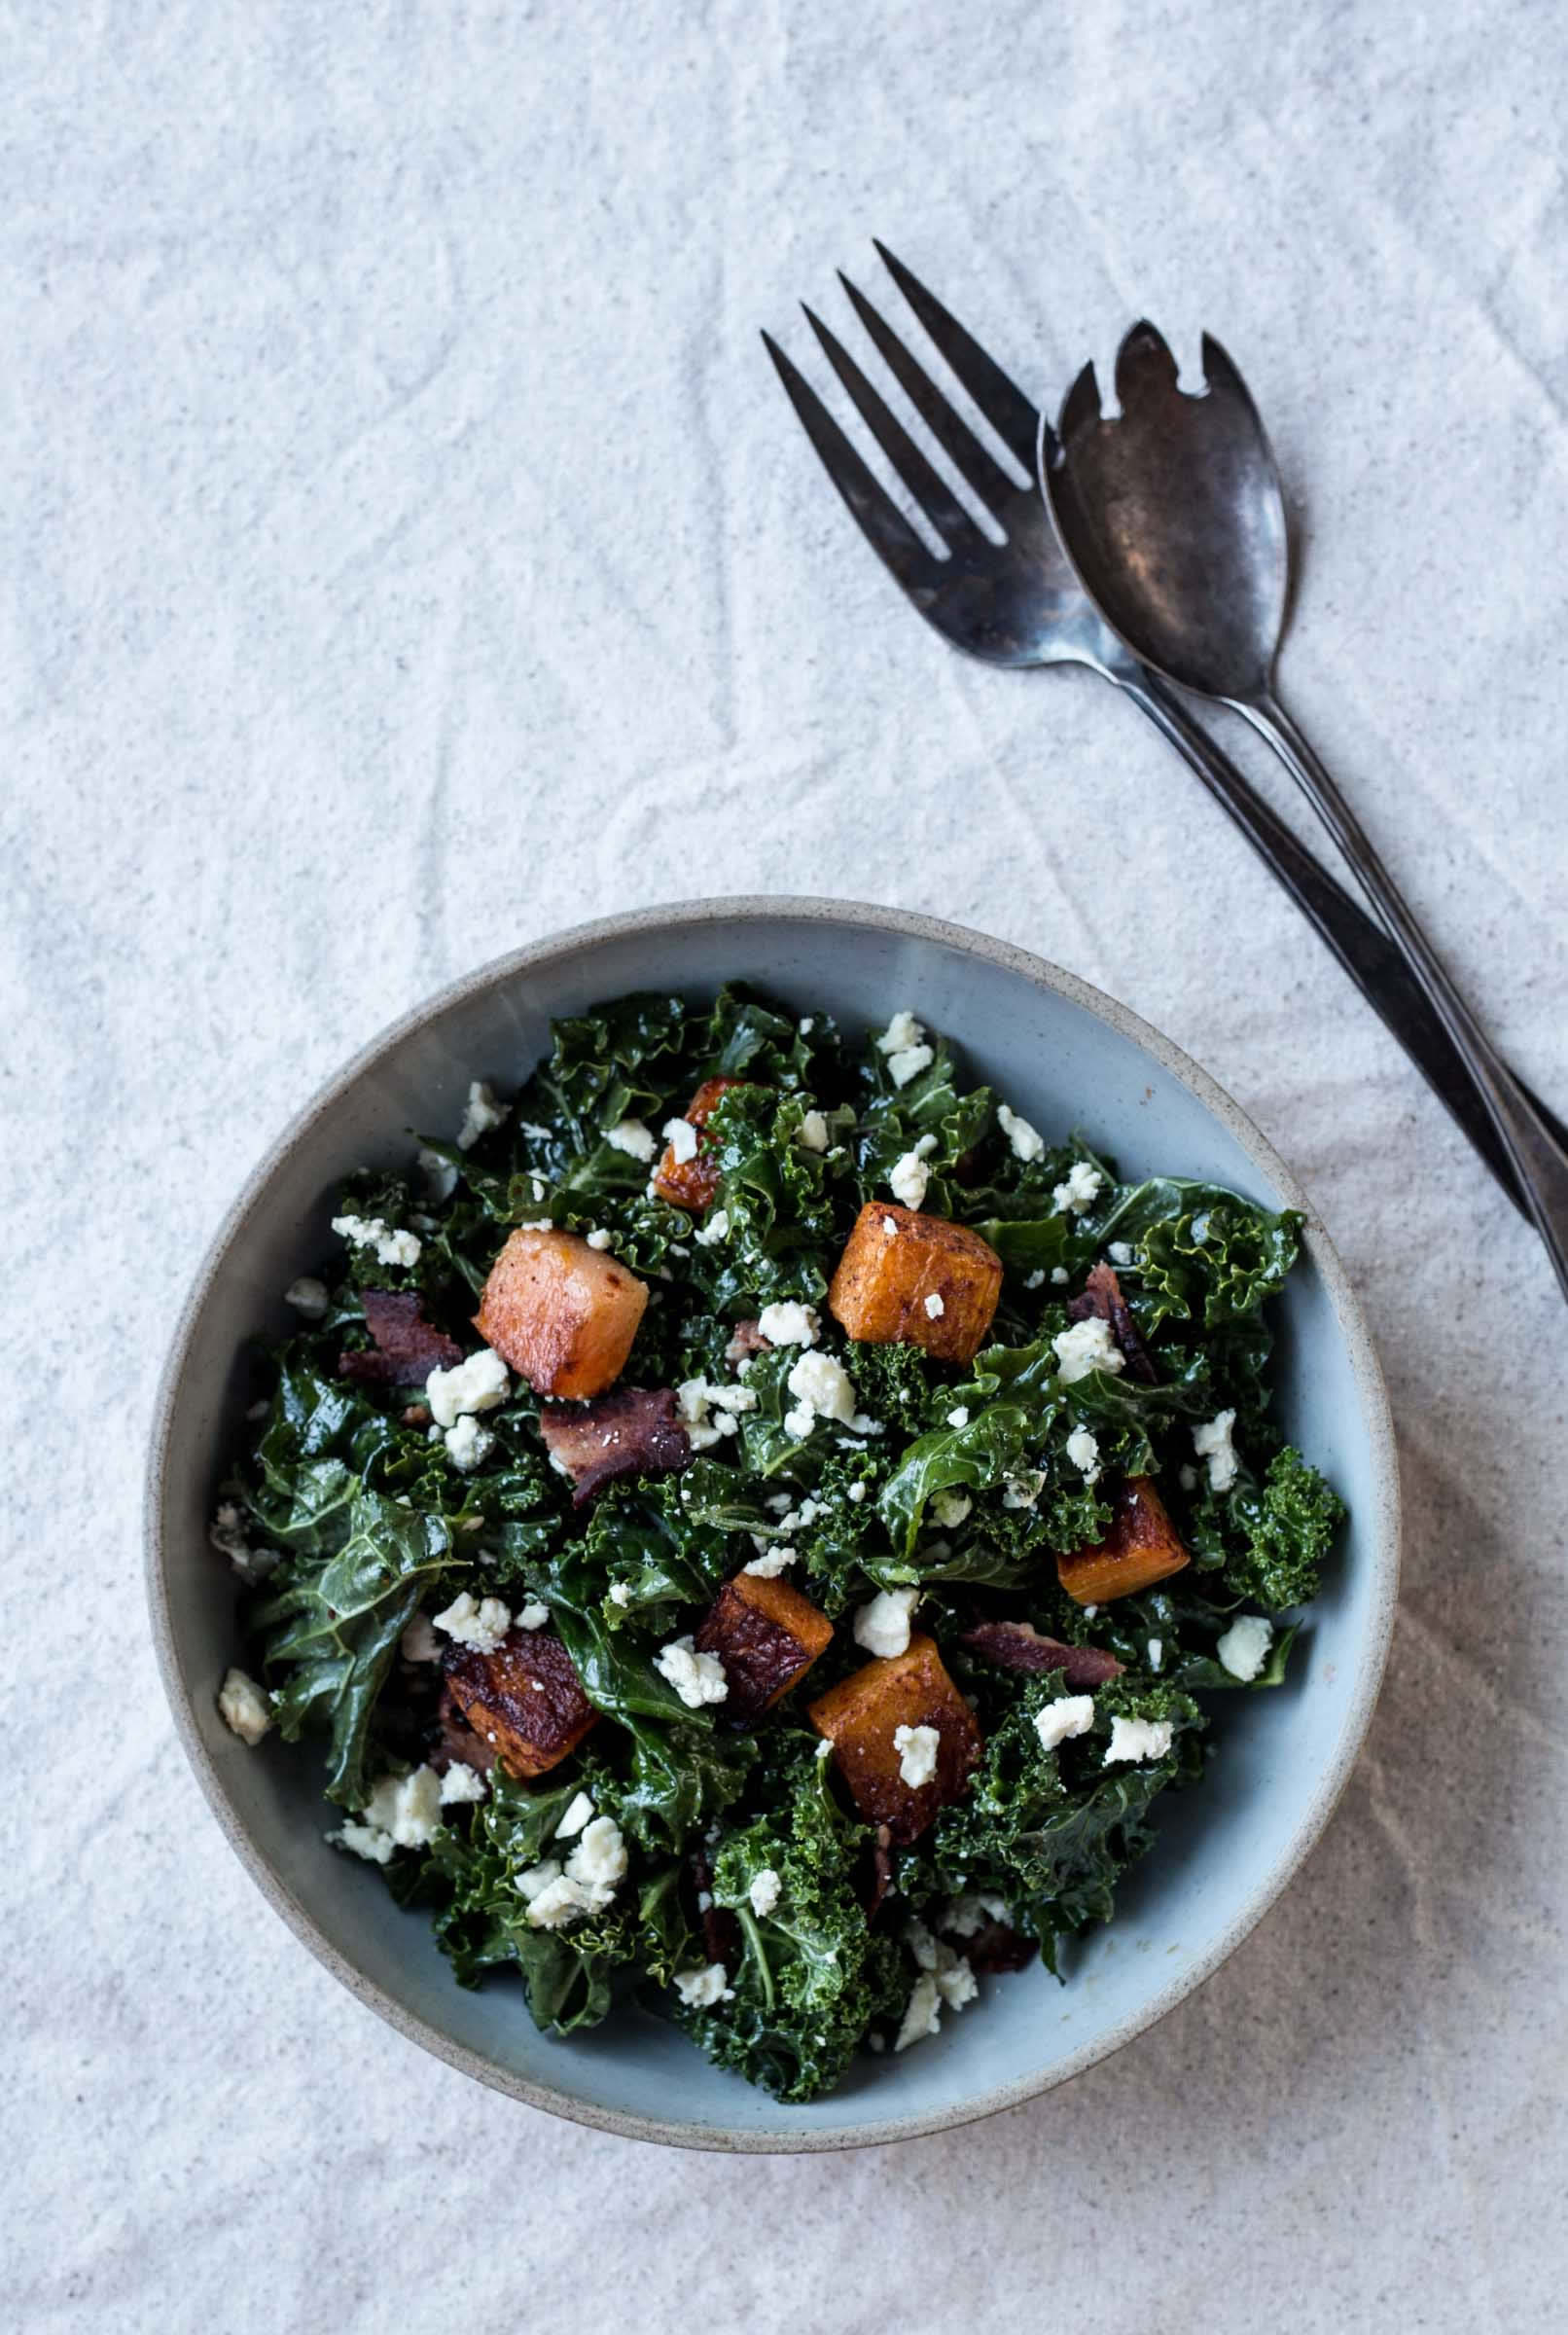 Photo: Butternut Squash Kale Salad with Maple-Bourbon Dressing from Dishing Up the Dirt by Andrea Bemis